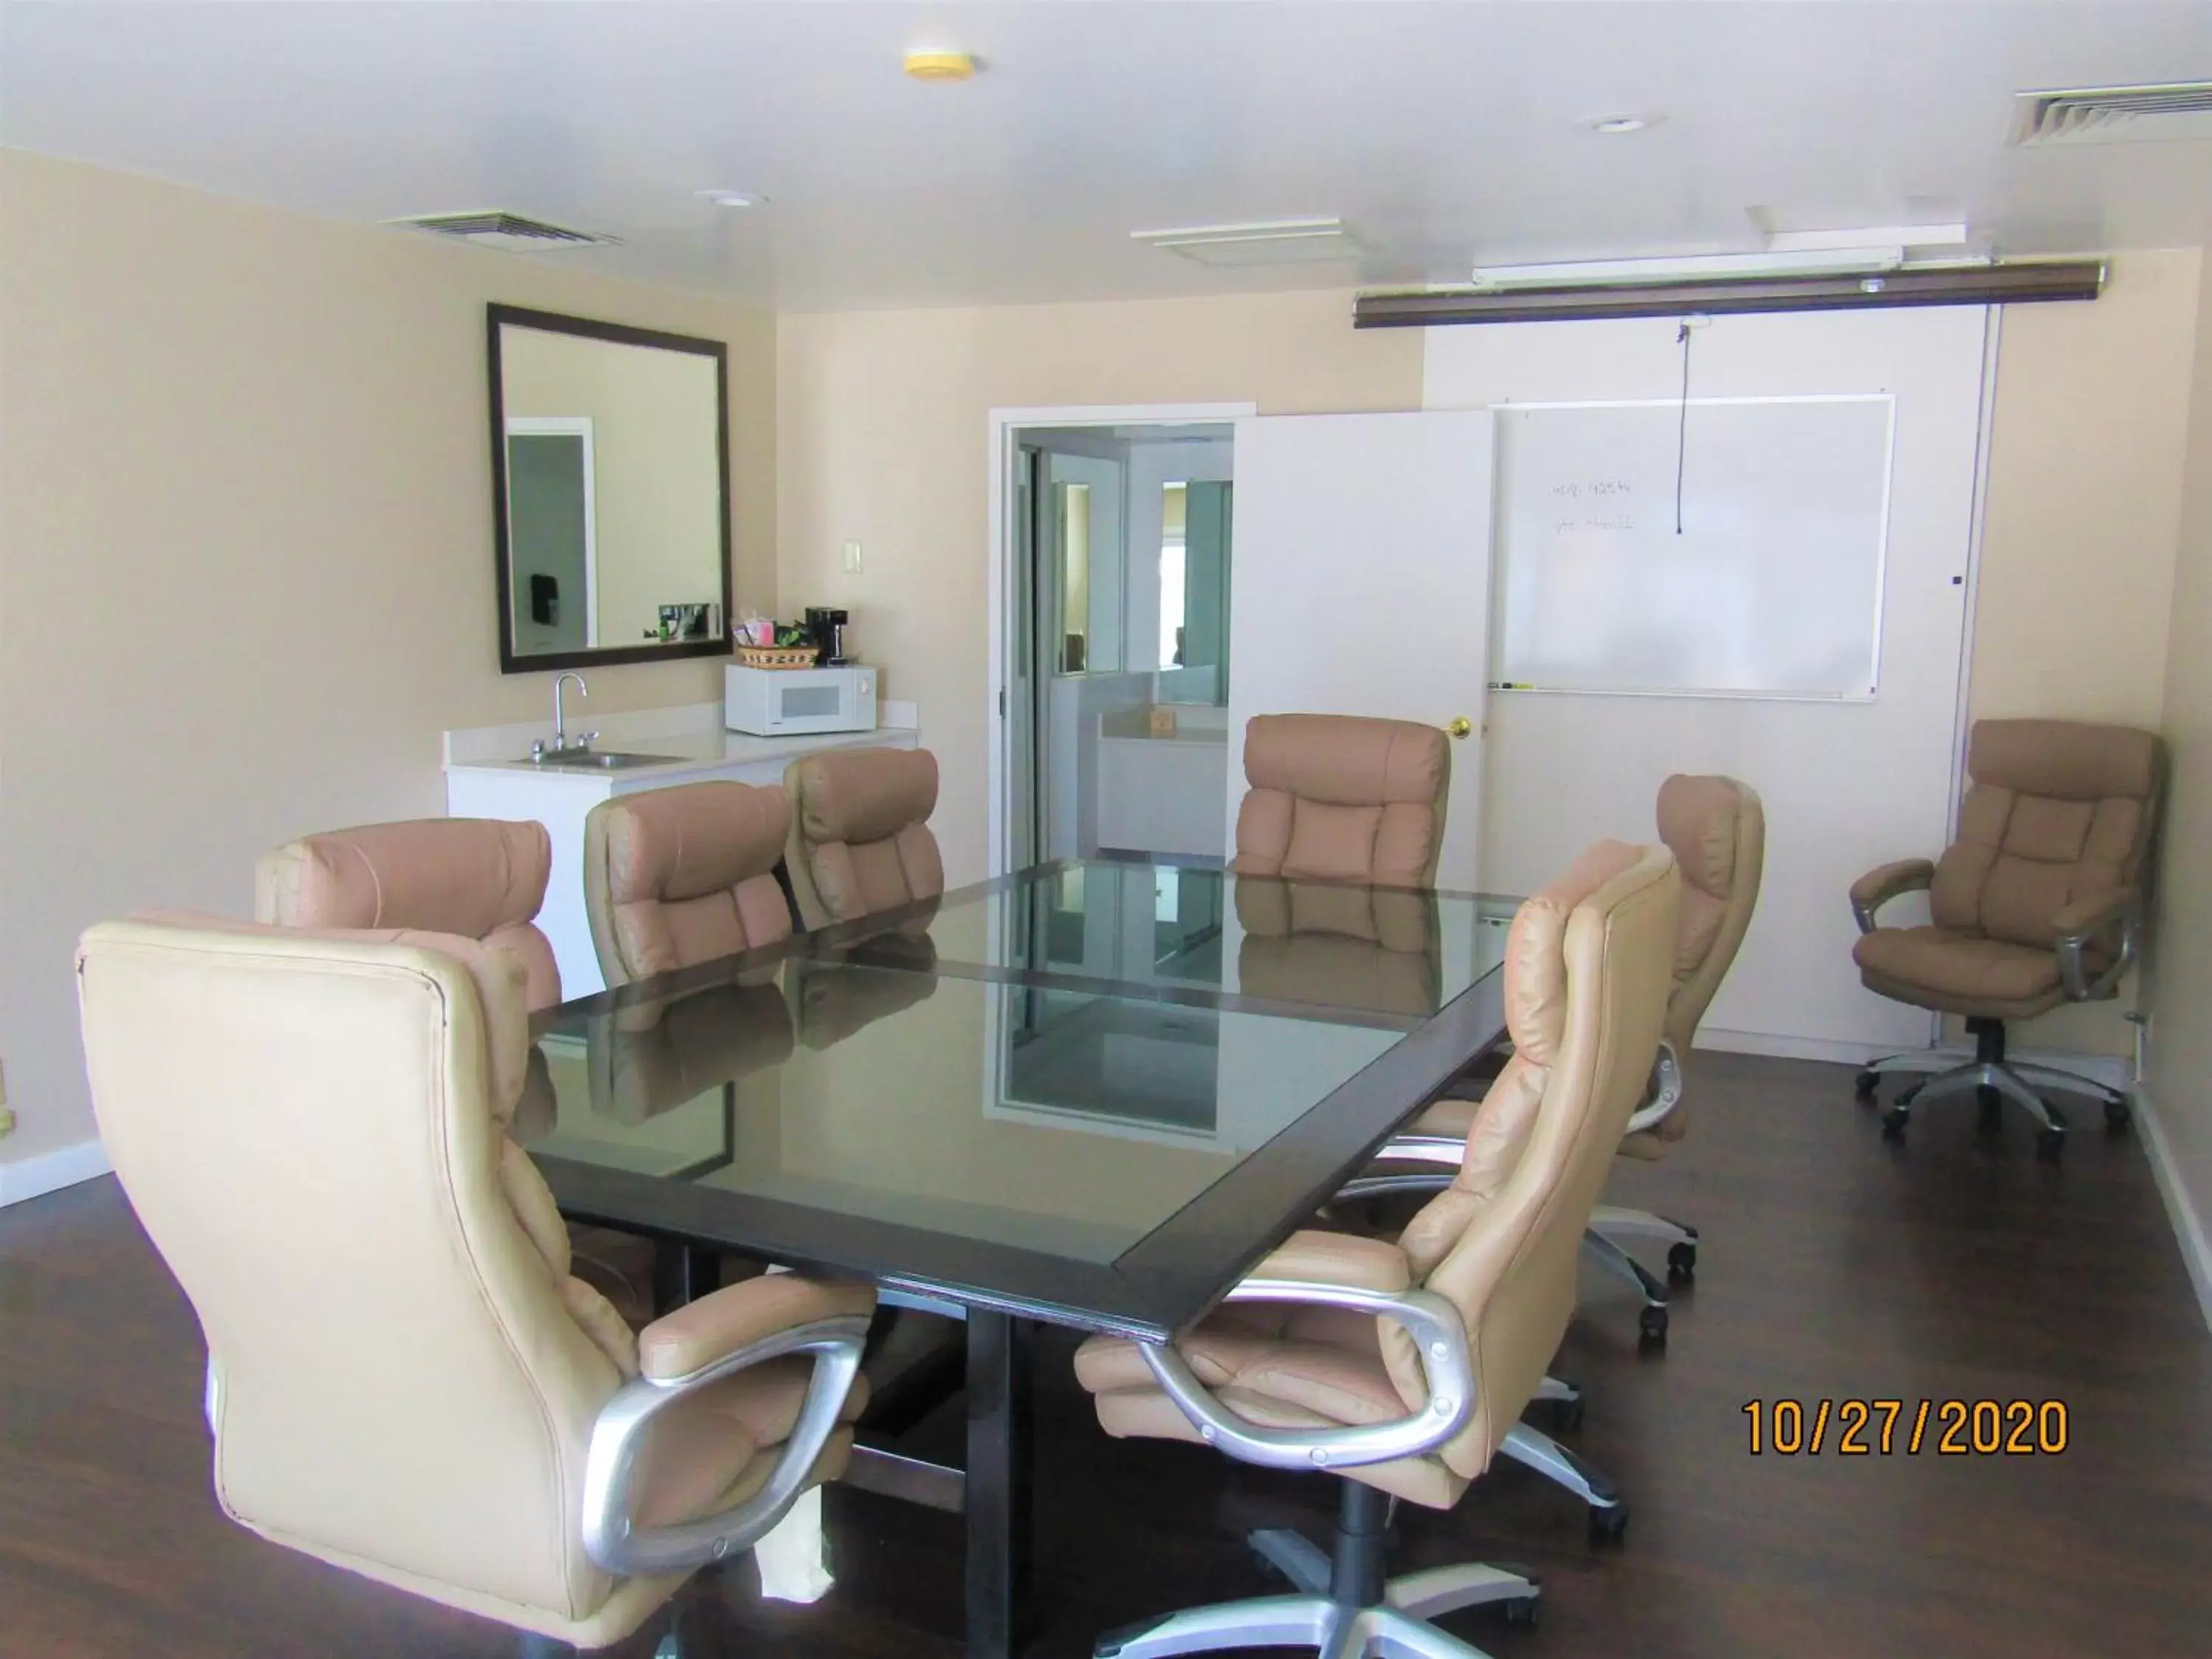 Meeting/conference room in Clarion Inn Ridgecrest